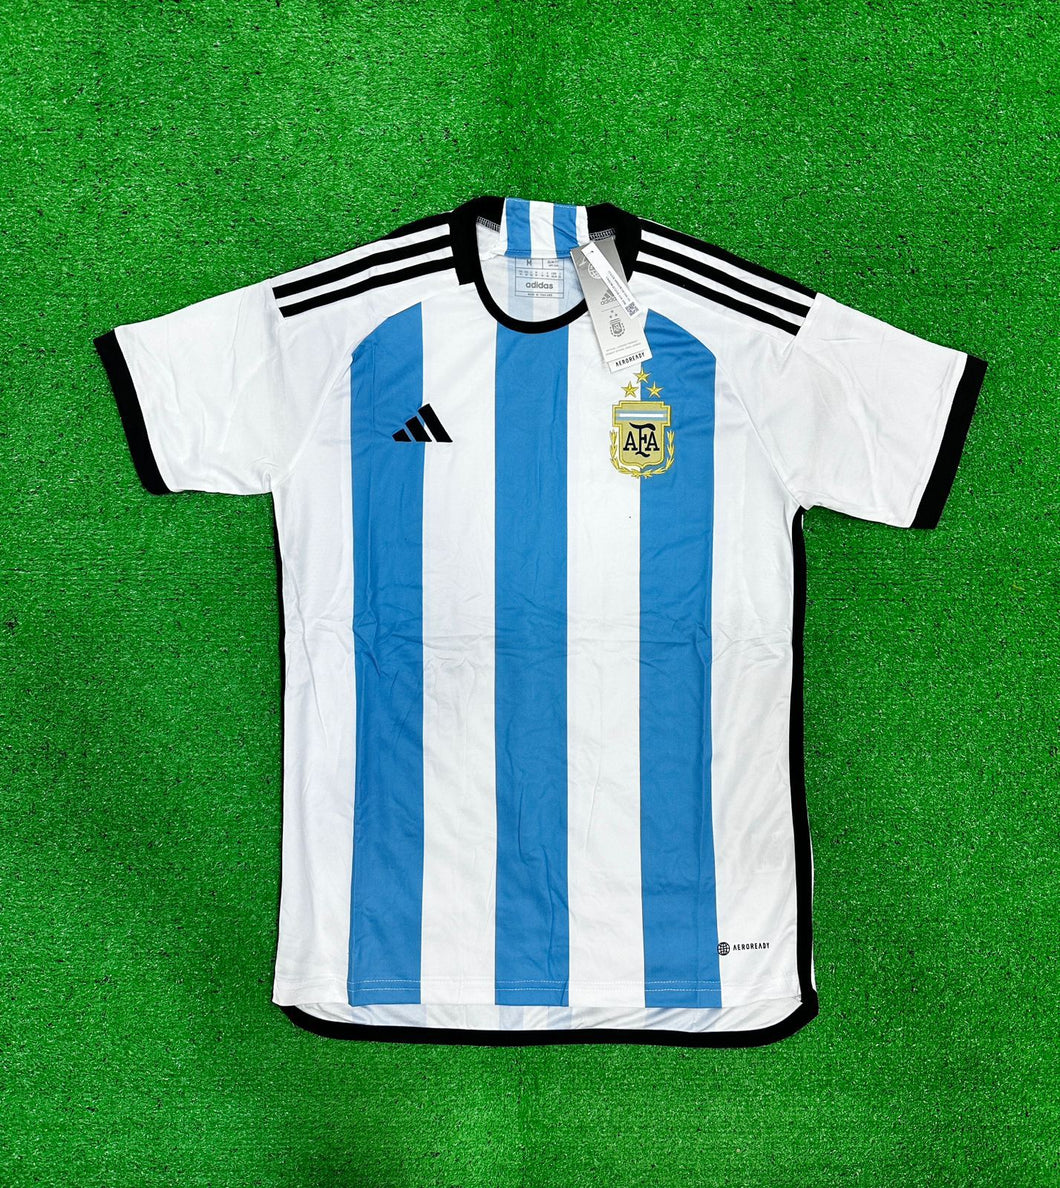 ARGENTINA WORLD CUP 3 STAR JERSEY WITH MESSI PRINTED